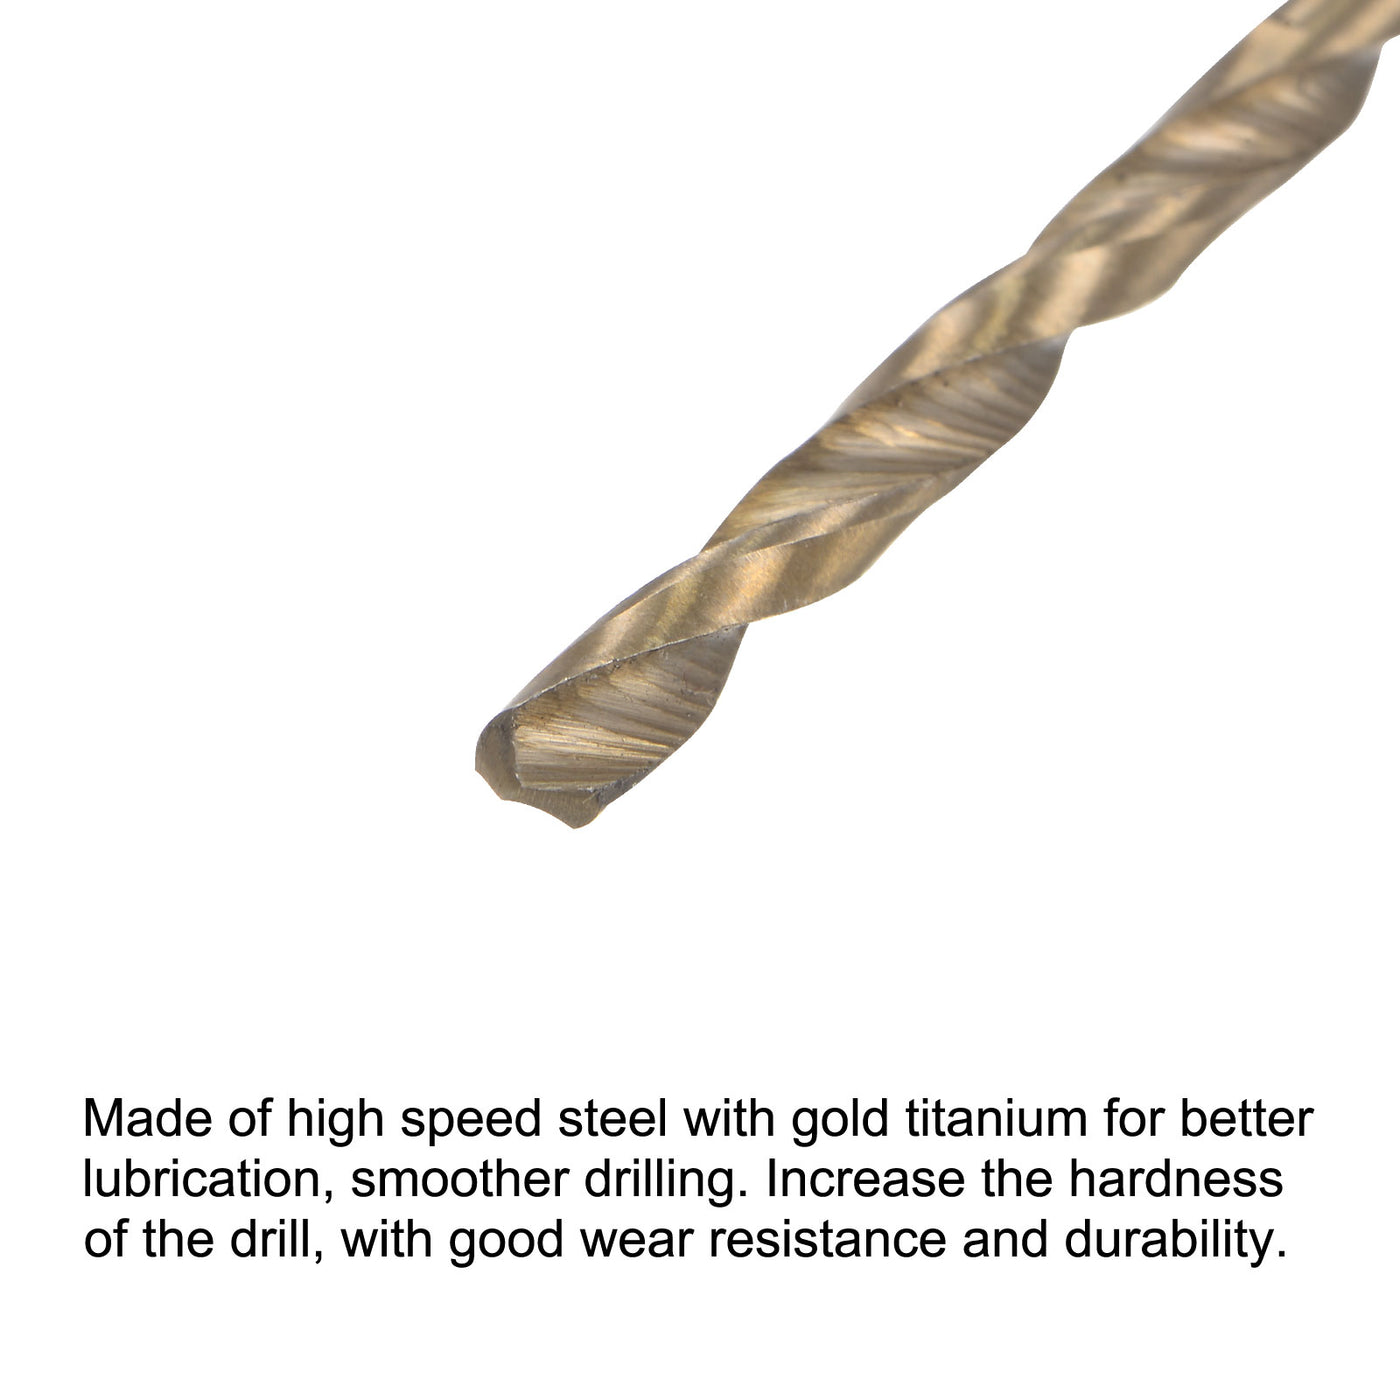 uxcell Uxcell 2.5mm High Speed Steel Twist Drill Bit with Hex Shank 75mm Length